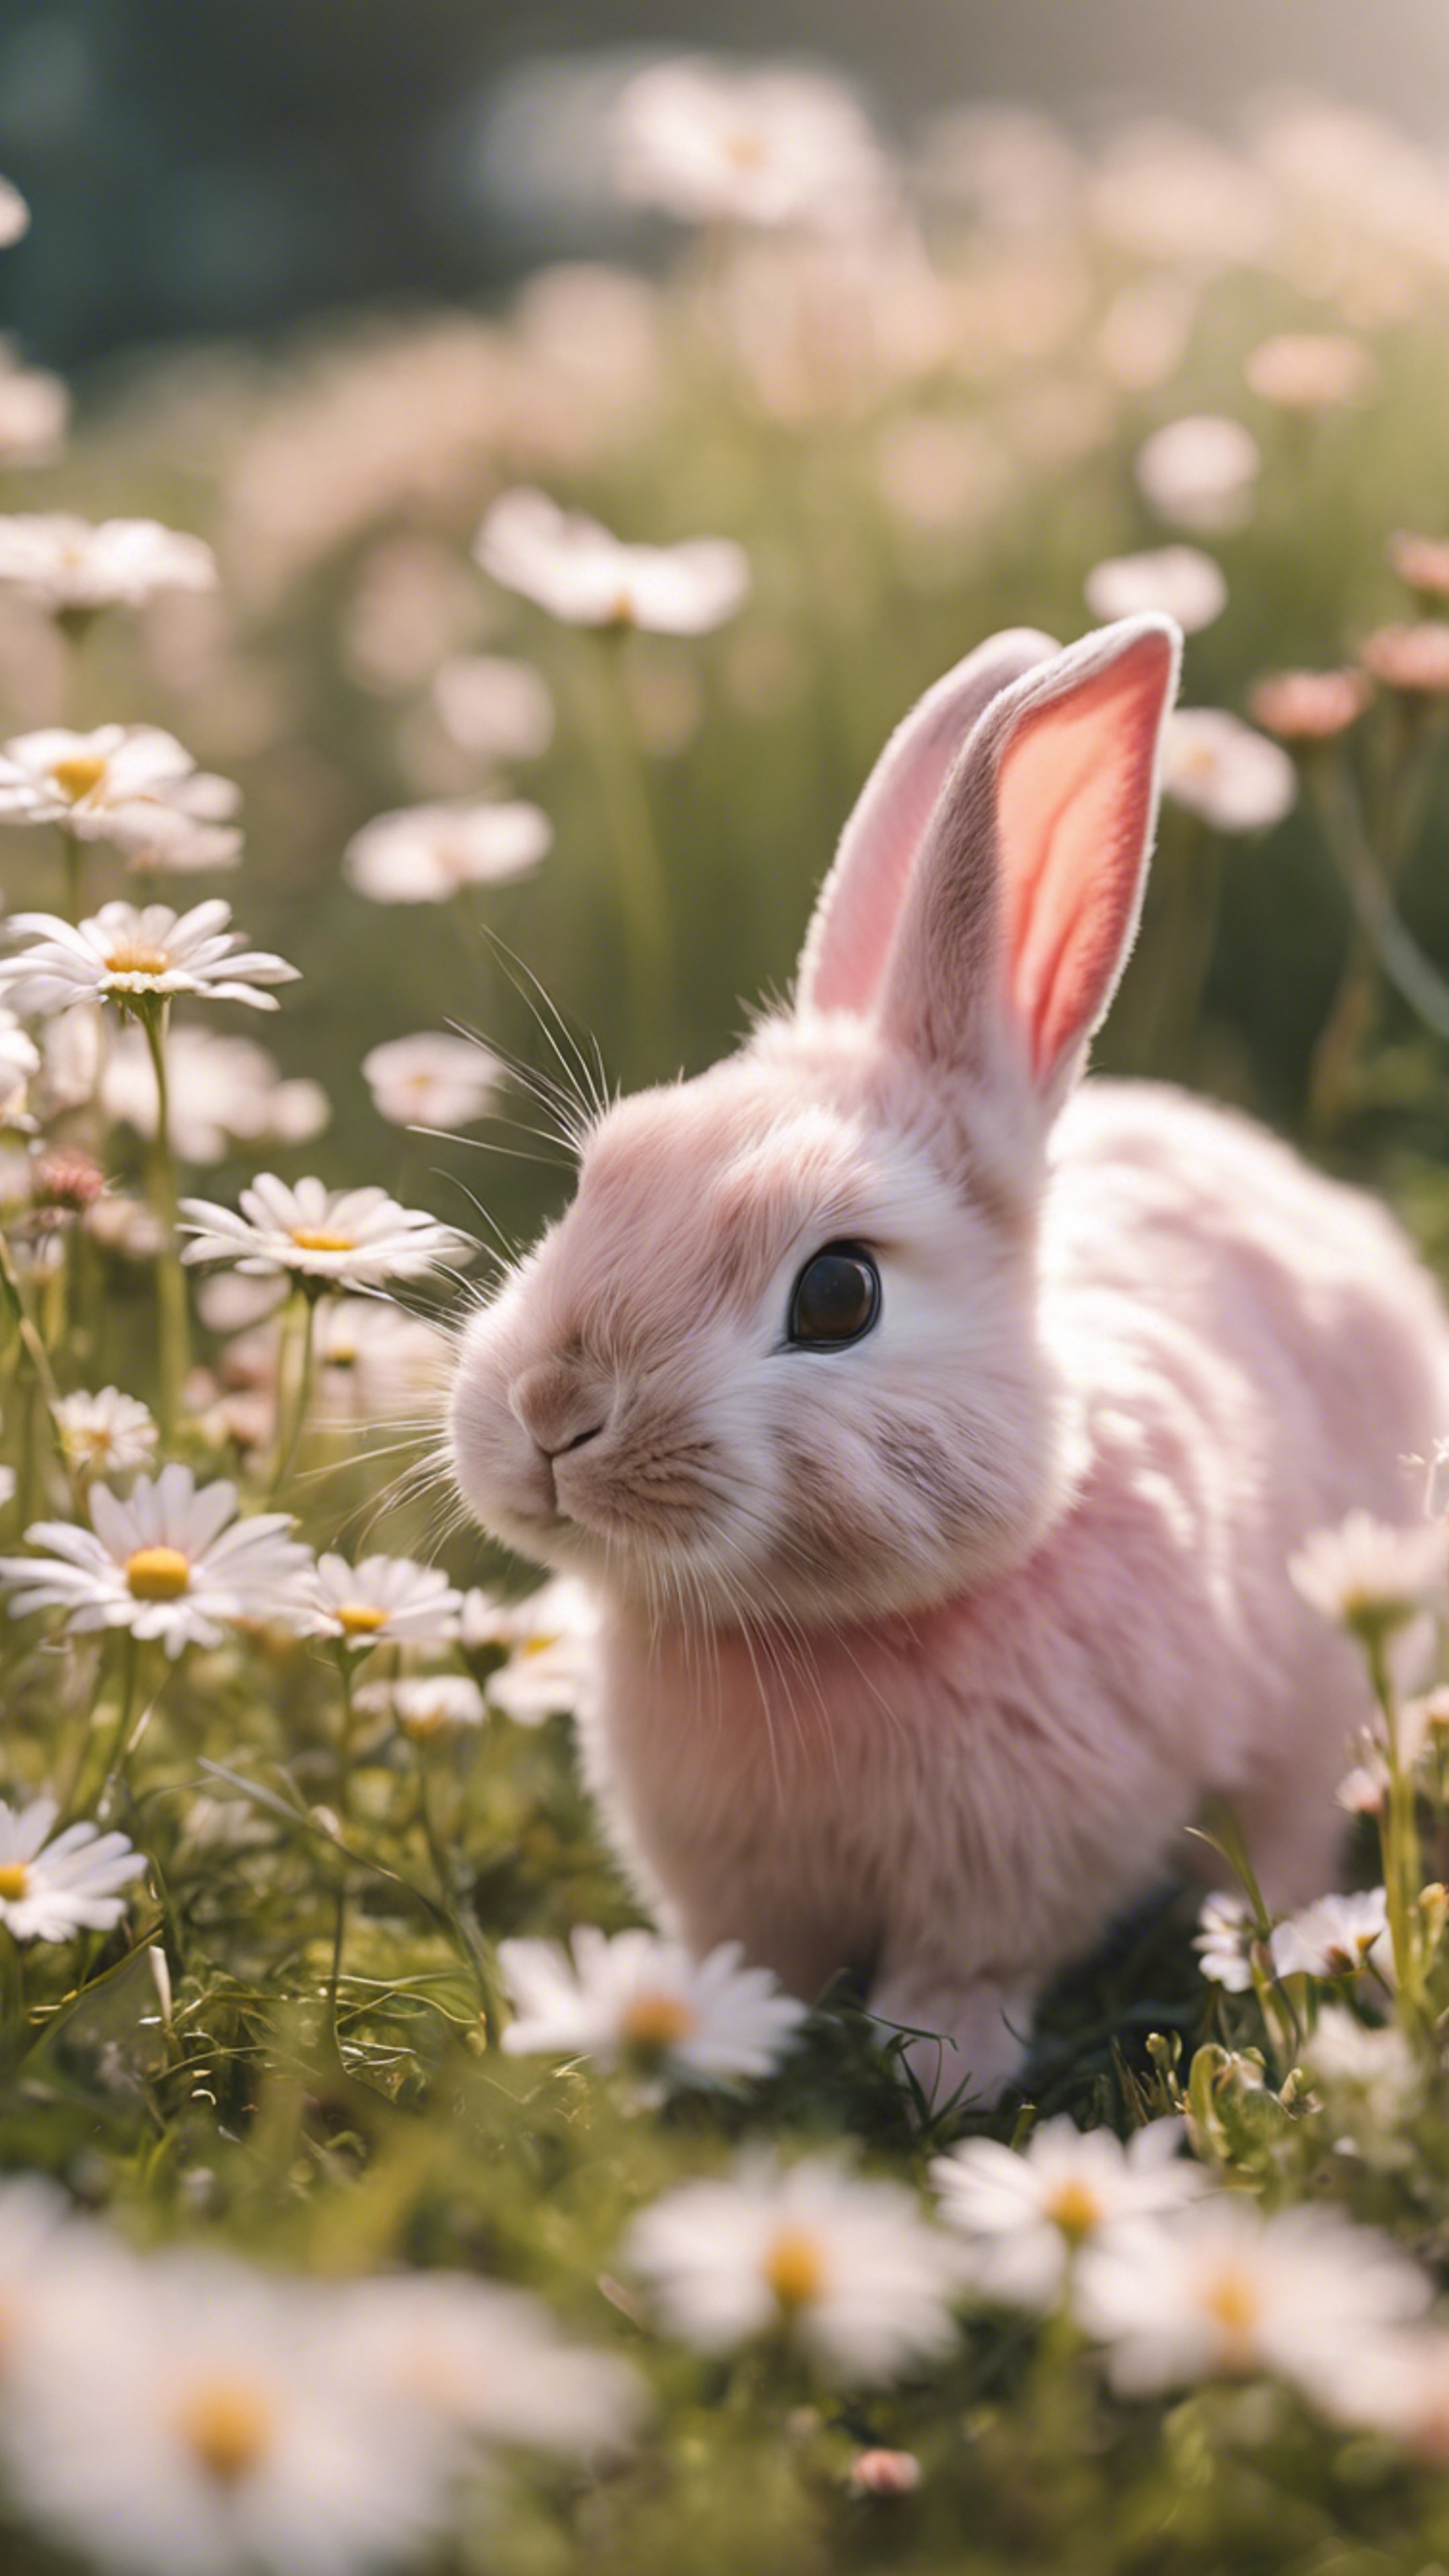 A pack of blush pink, Kawaii style rabbits happily playing in a field of daisies. Tapeet[cf36497c89454393a51d]